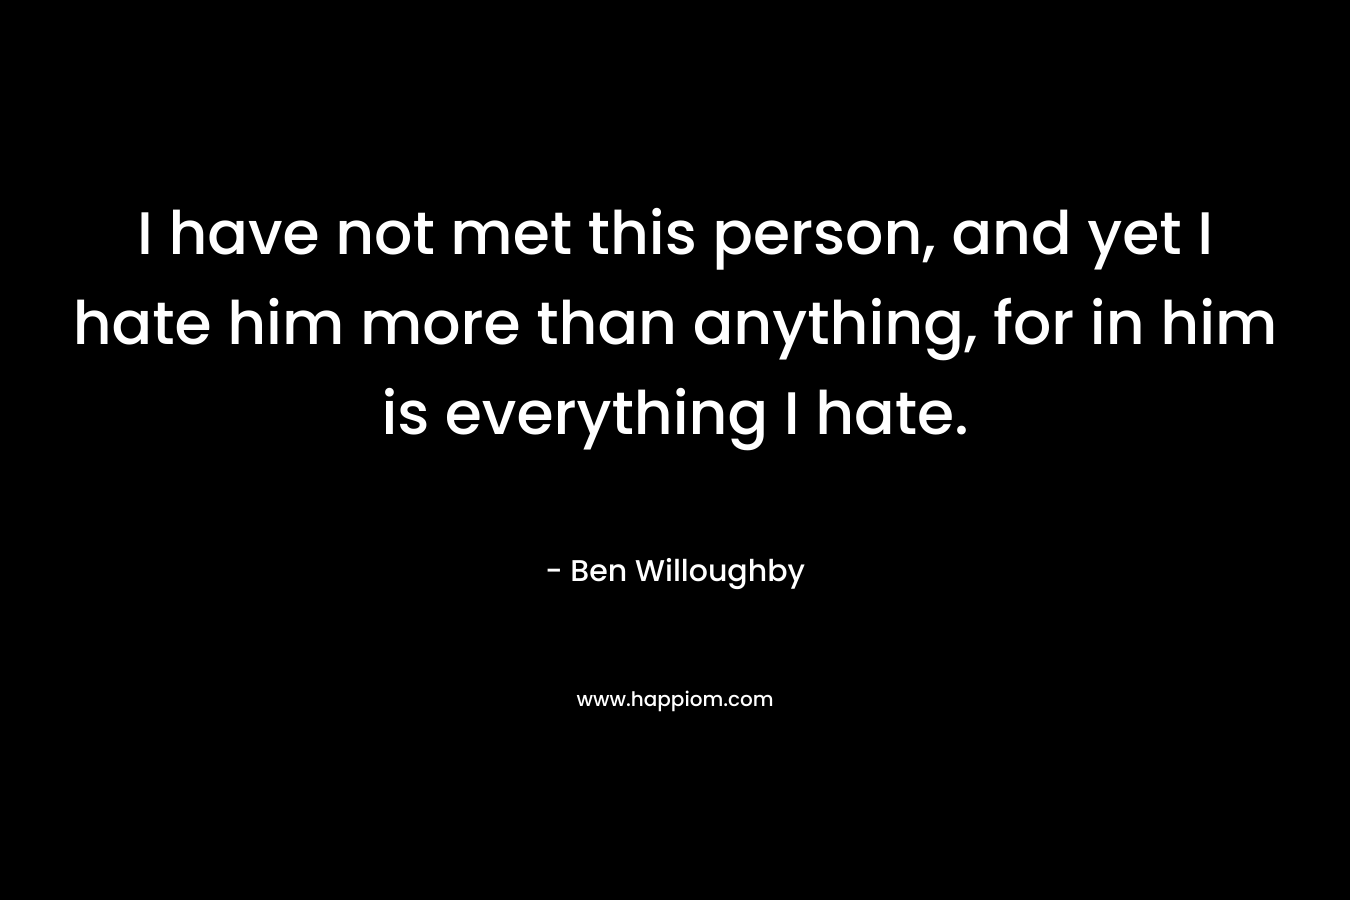 I have not met this person, and yet I hate him more than anything, for in him is everything I hate. – Ben Willoughby